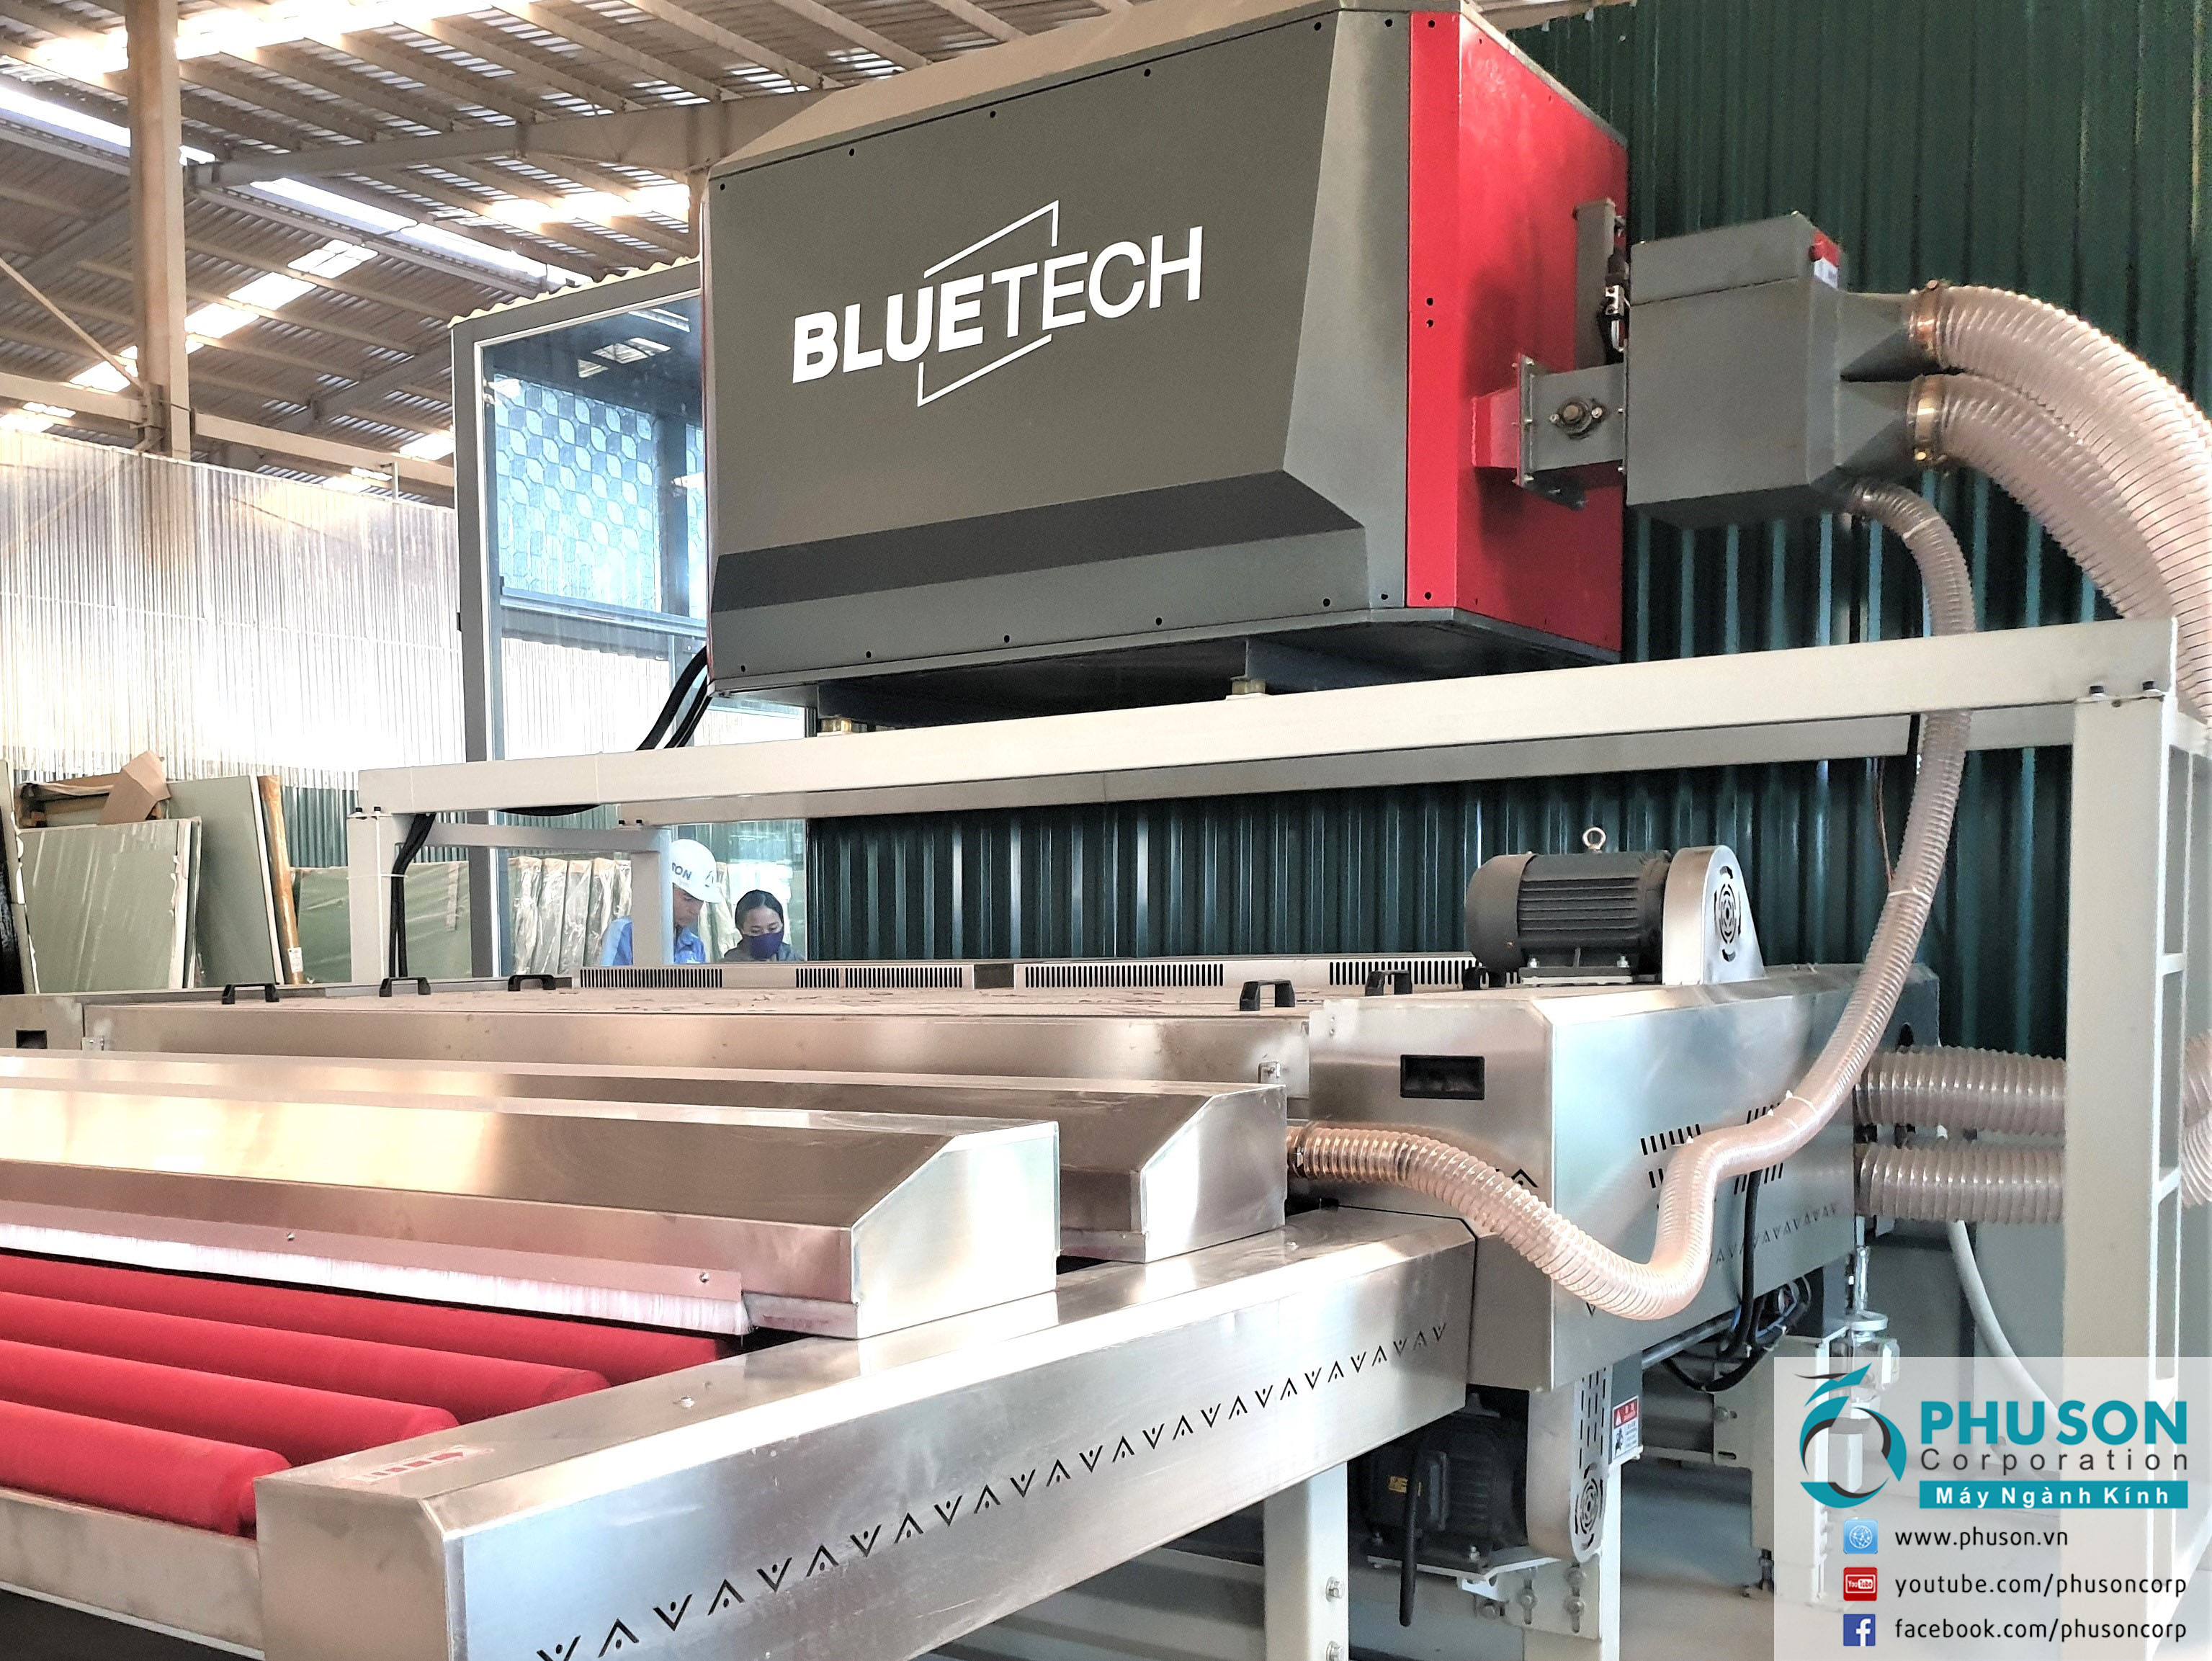 PHU SON Corporation completed installation and technology transfer of BLUETECH automatic high-quality safety laminated glass production line at DAI DUONG GLASS factory.